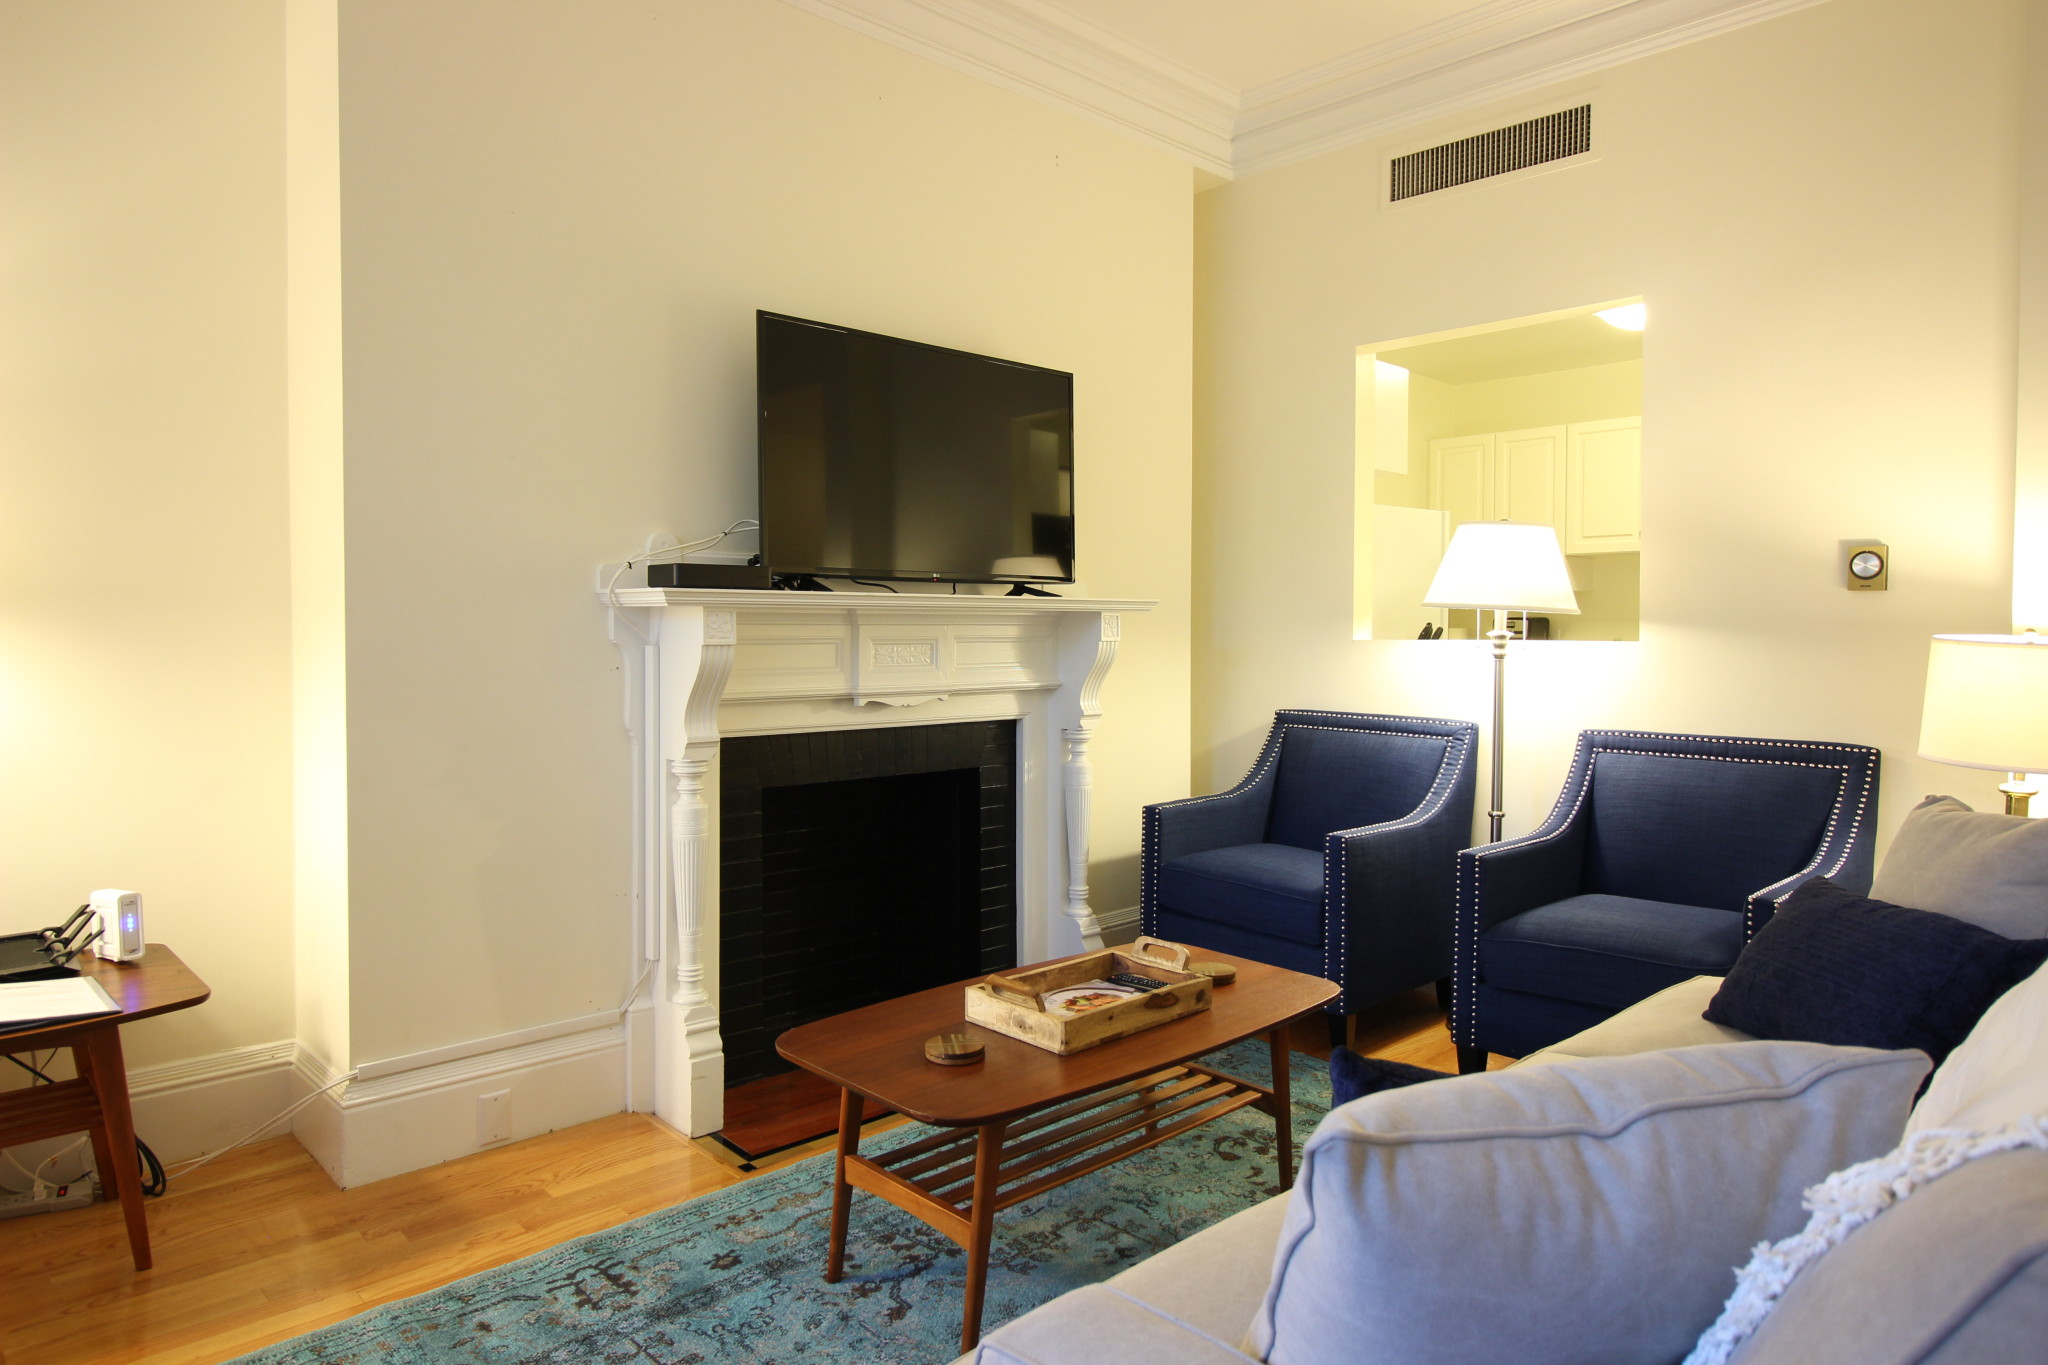 Photos of apartment on Commonwealth Ave.,Boston MA 02115